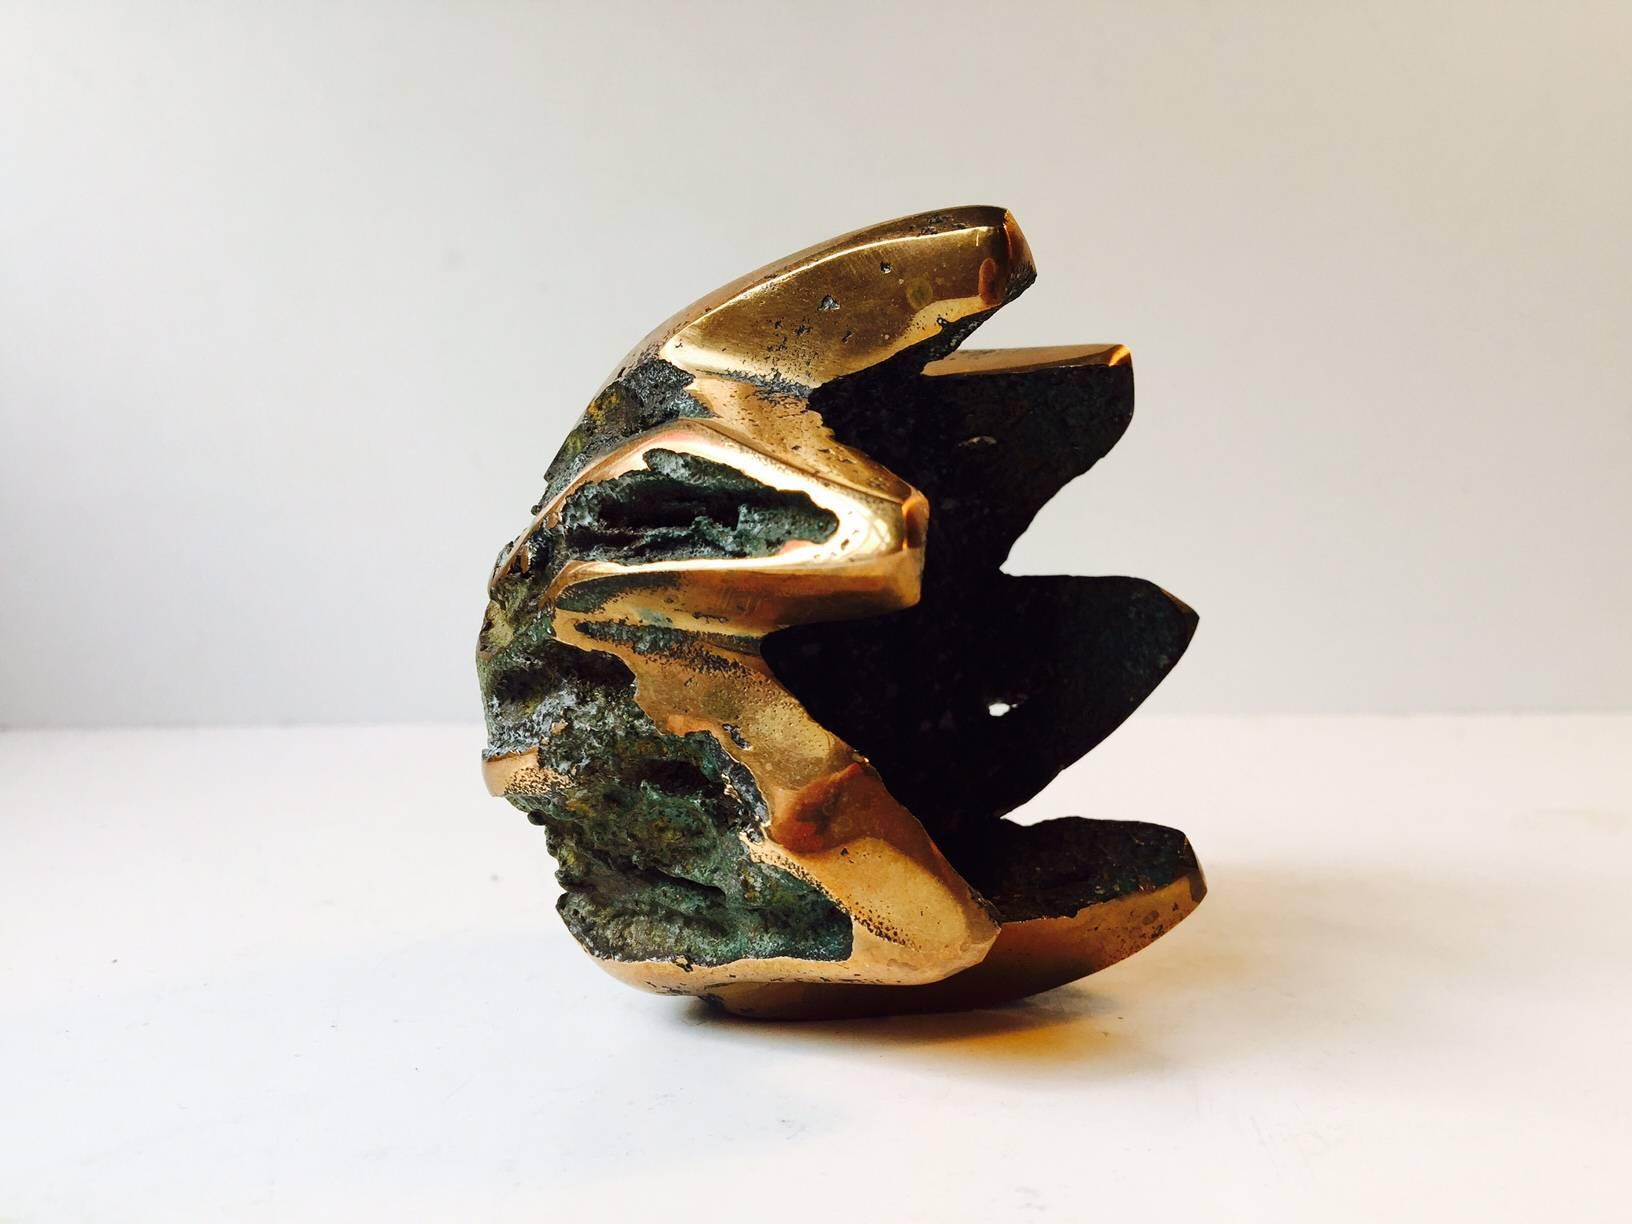 Very heavy, spiky and sculptural bronze vessel or small bowl by anonymous Danish artist. It was designed and made in Denmark in the 1970s according to the private collector it came from. It weighs around 1 kg.